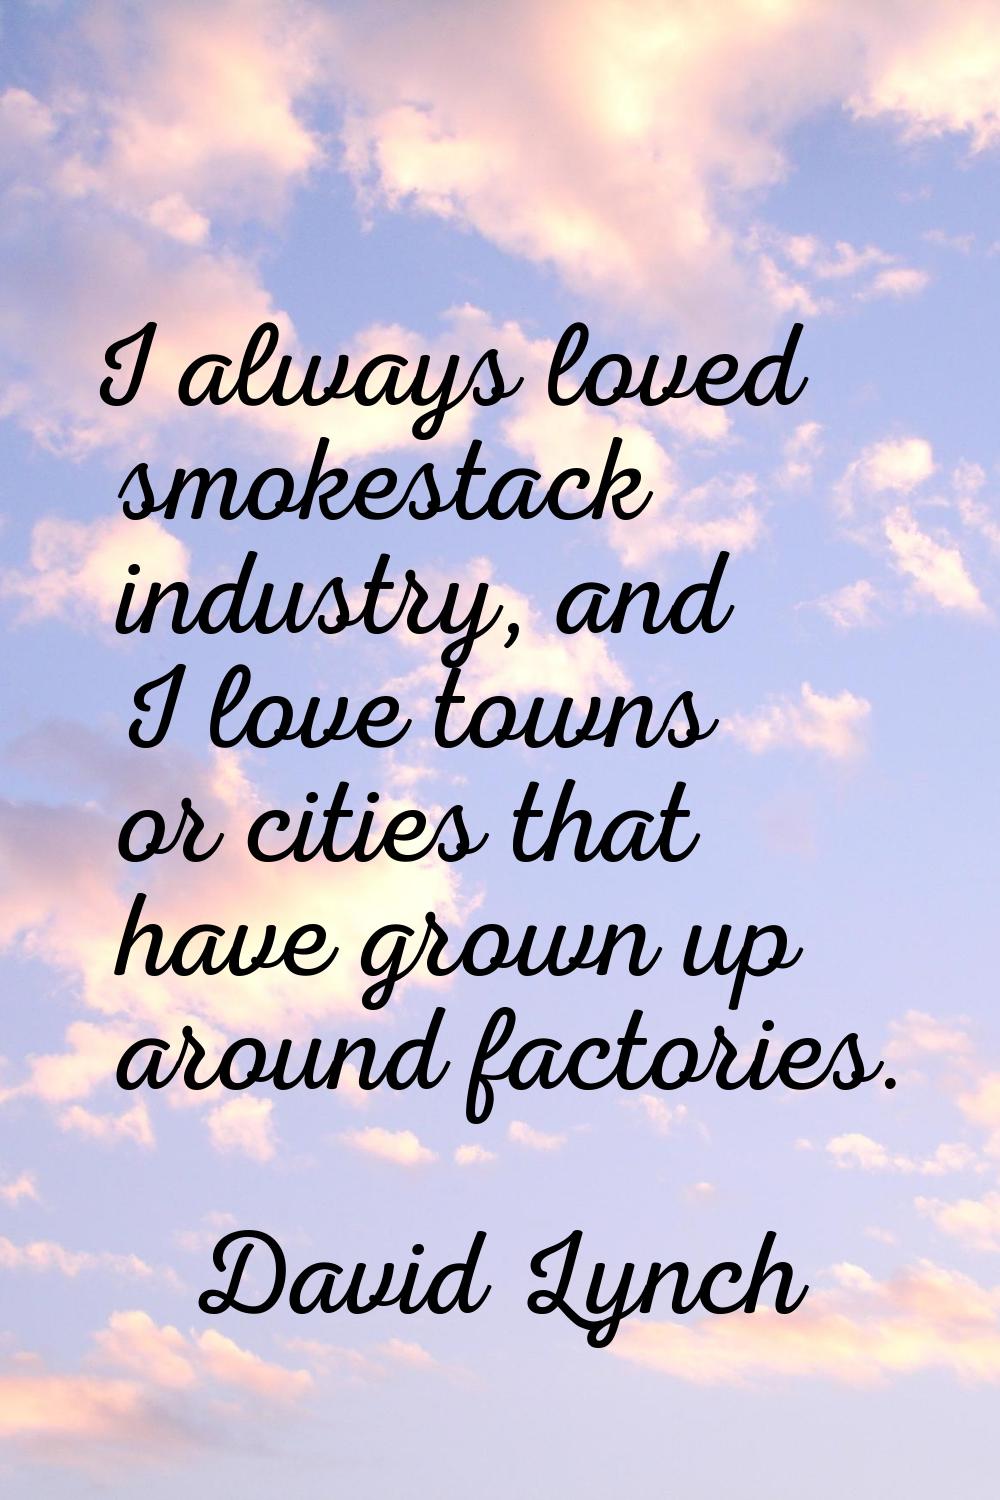 I always loved smokestack industry, and I love towns or cities that have grown up around factories.